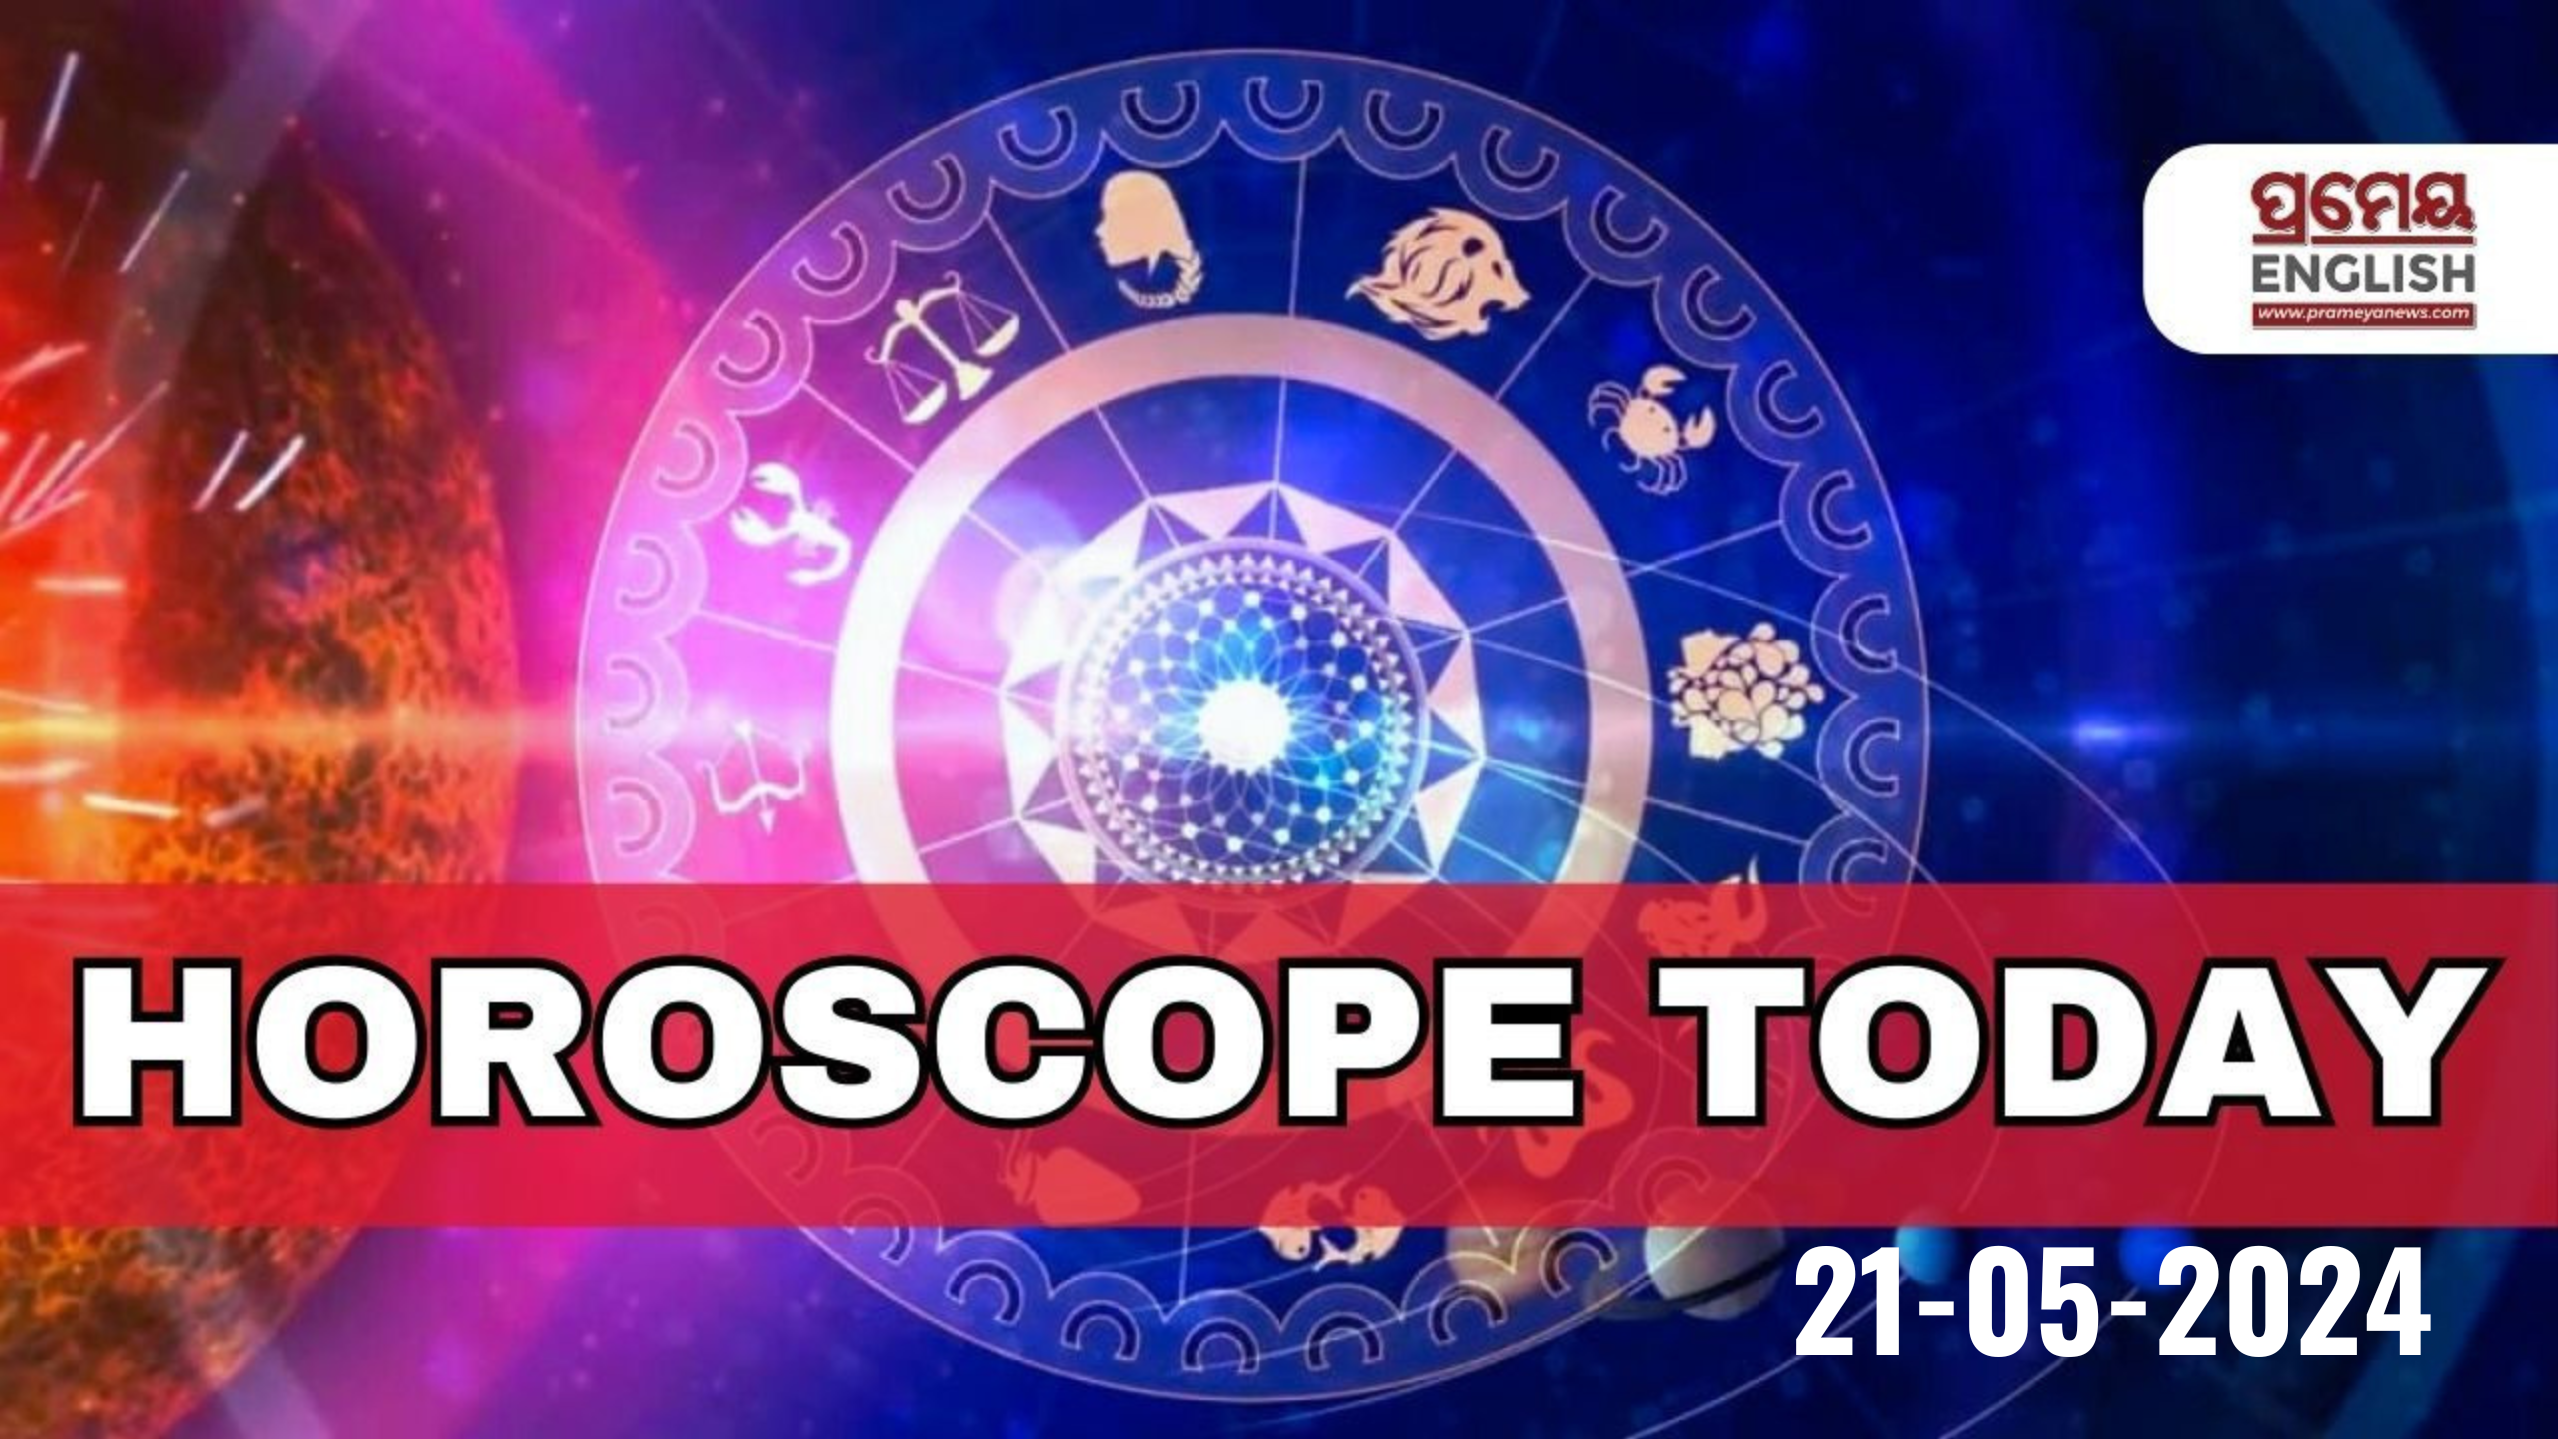 Horoscope Today: Astrological prediction for May 21, 2024